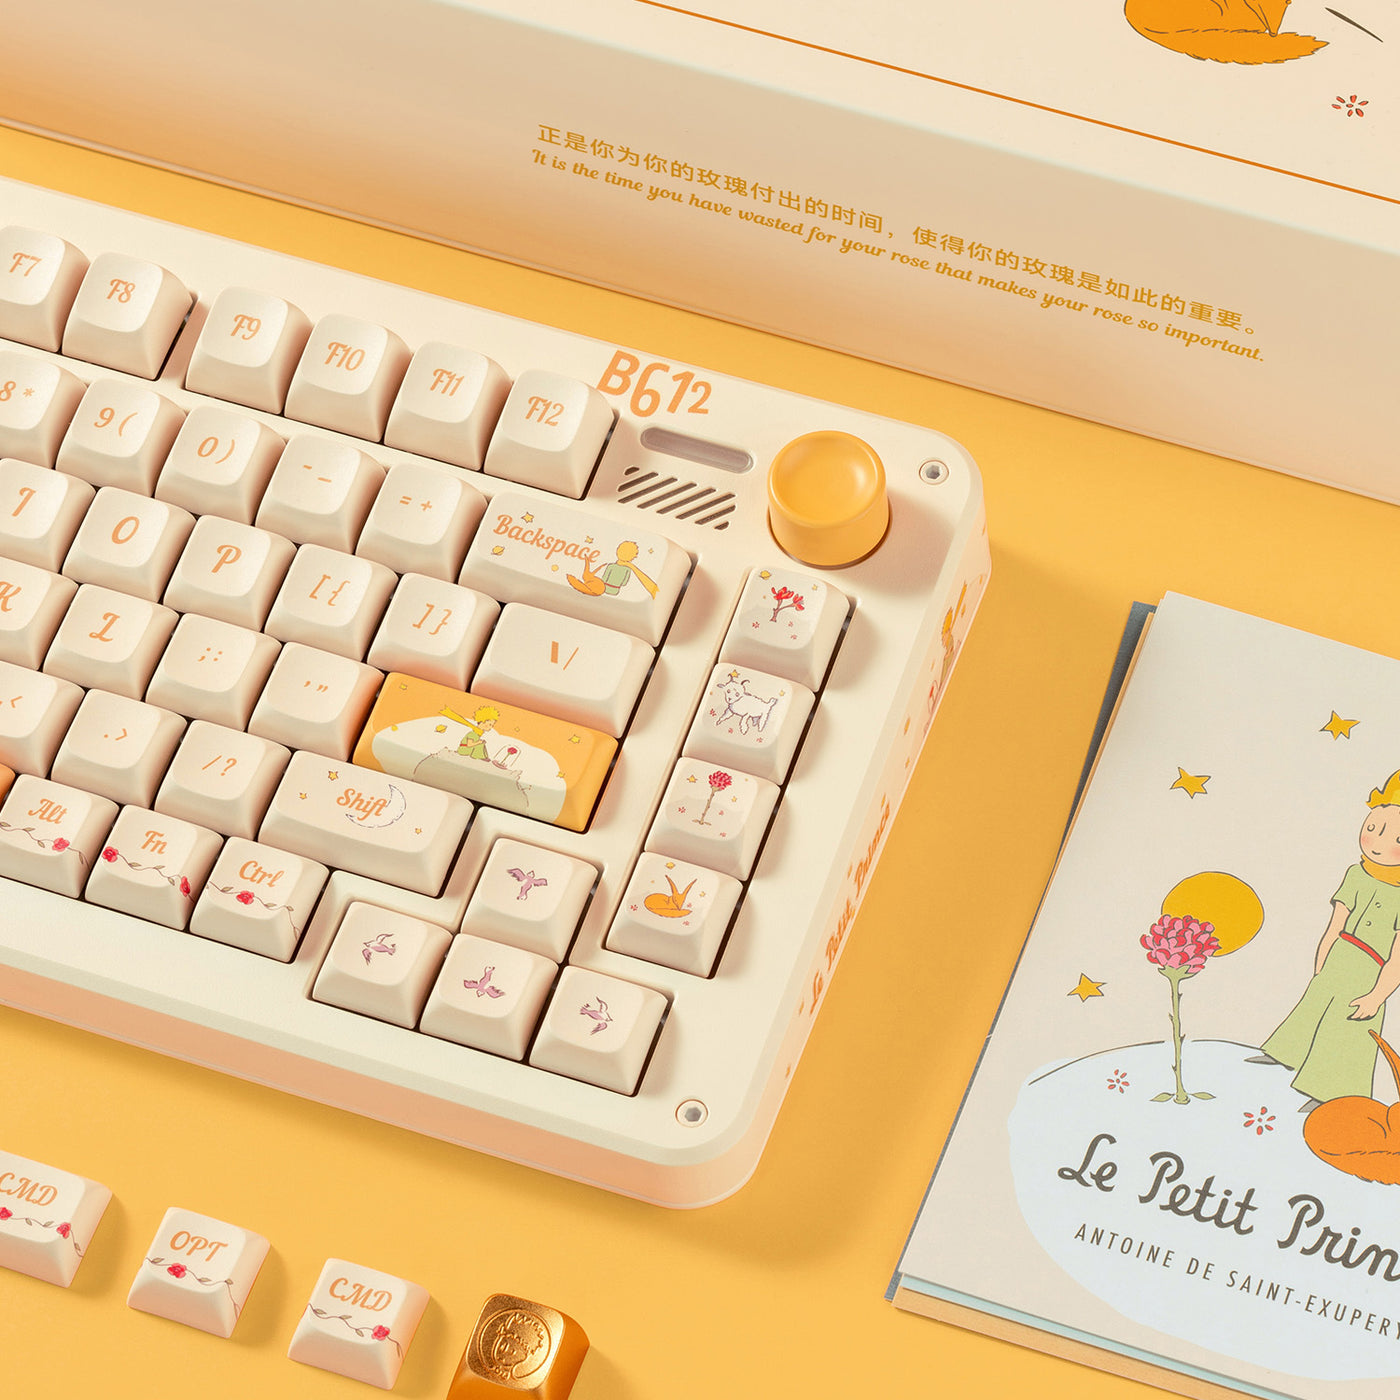 The little prince keyboards